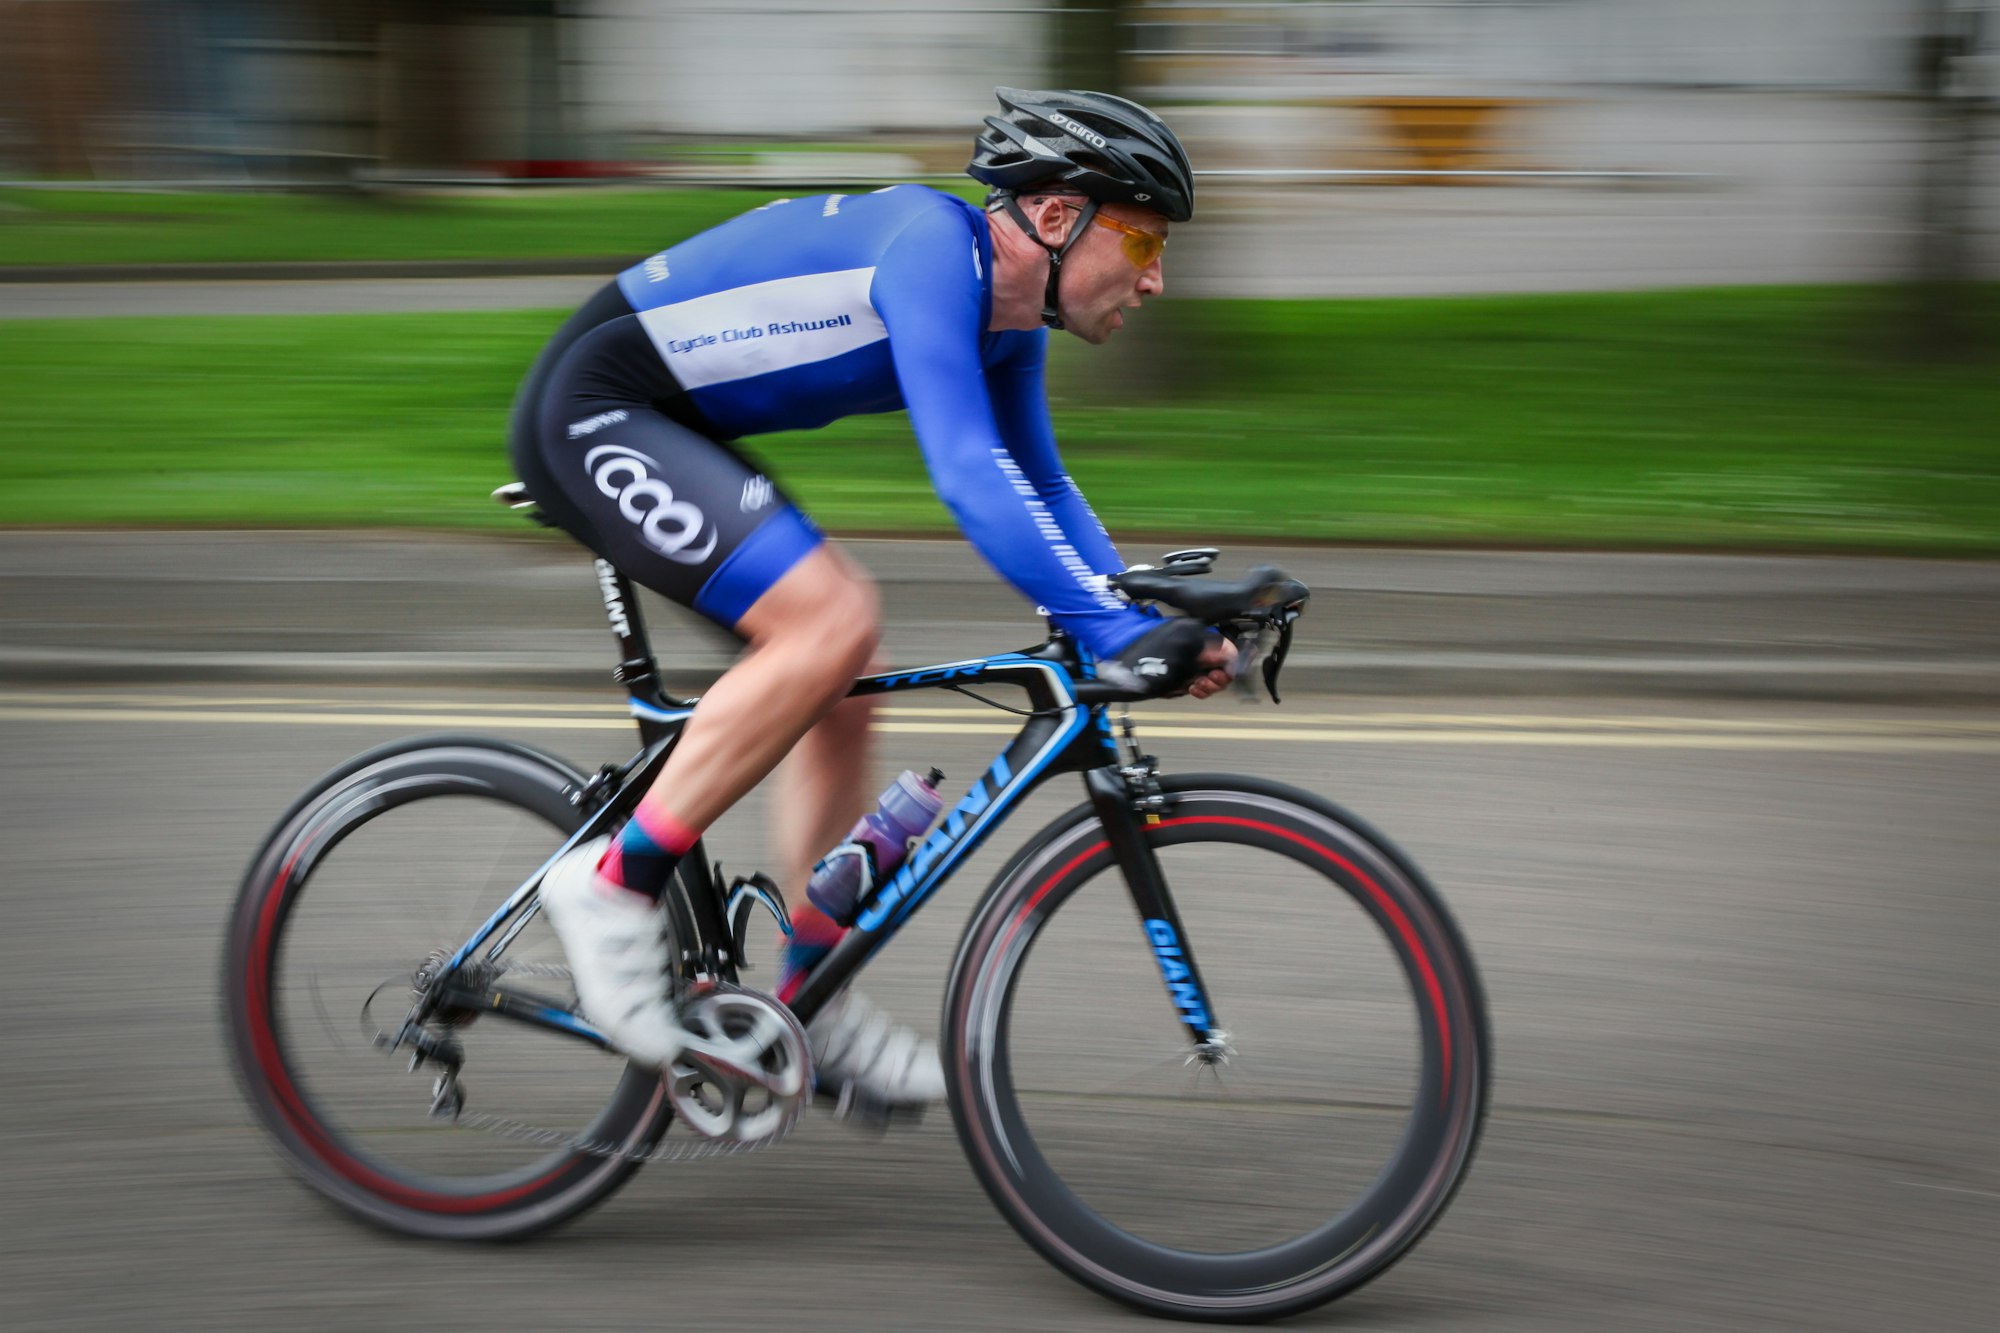 Slow shutter panning shot of a speeding cycle racer taken during the Bricket Wood round of the Tour of Hertfordshire, May 2016